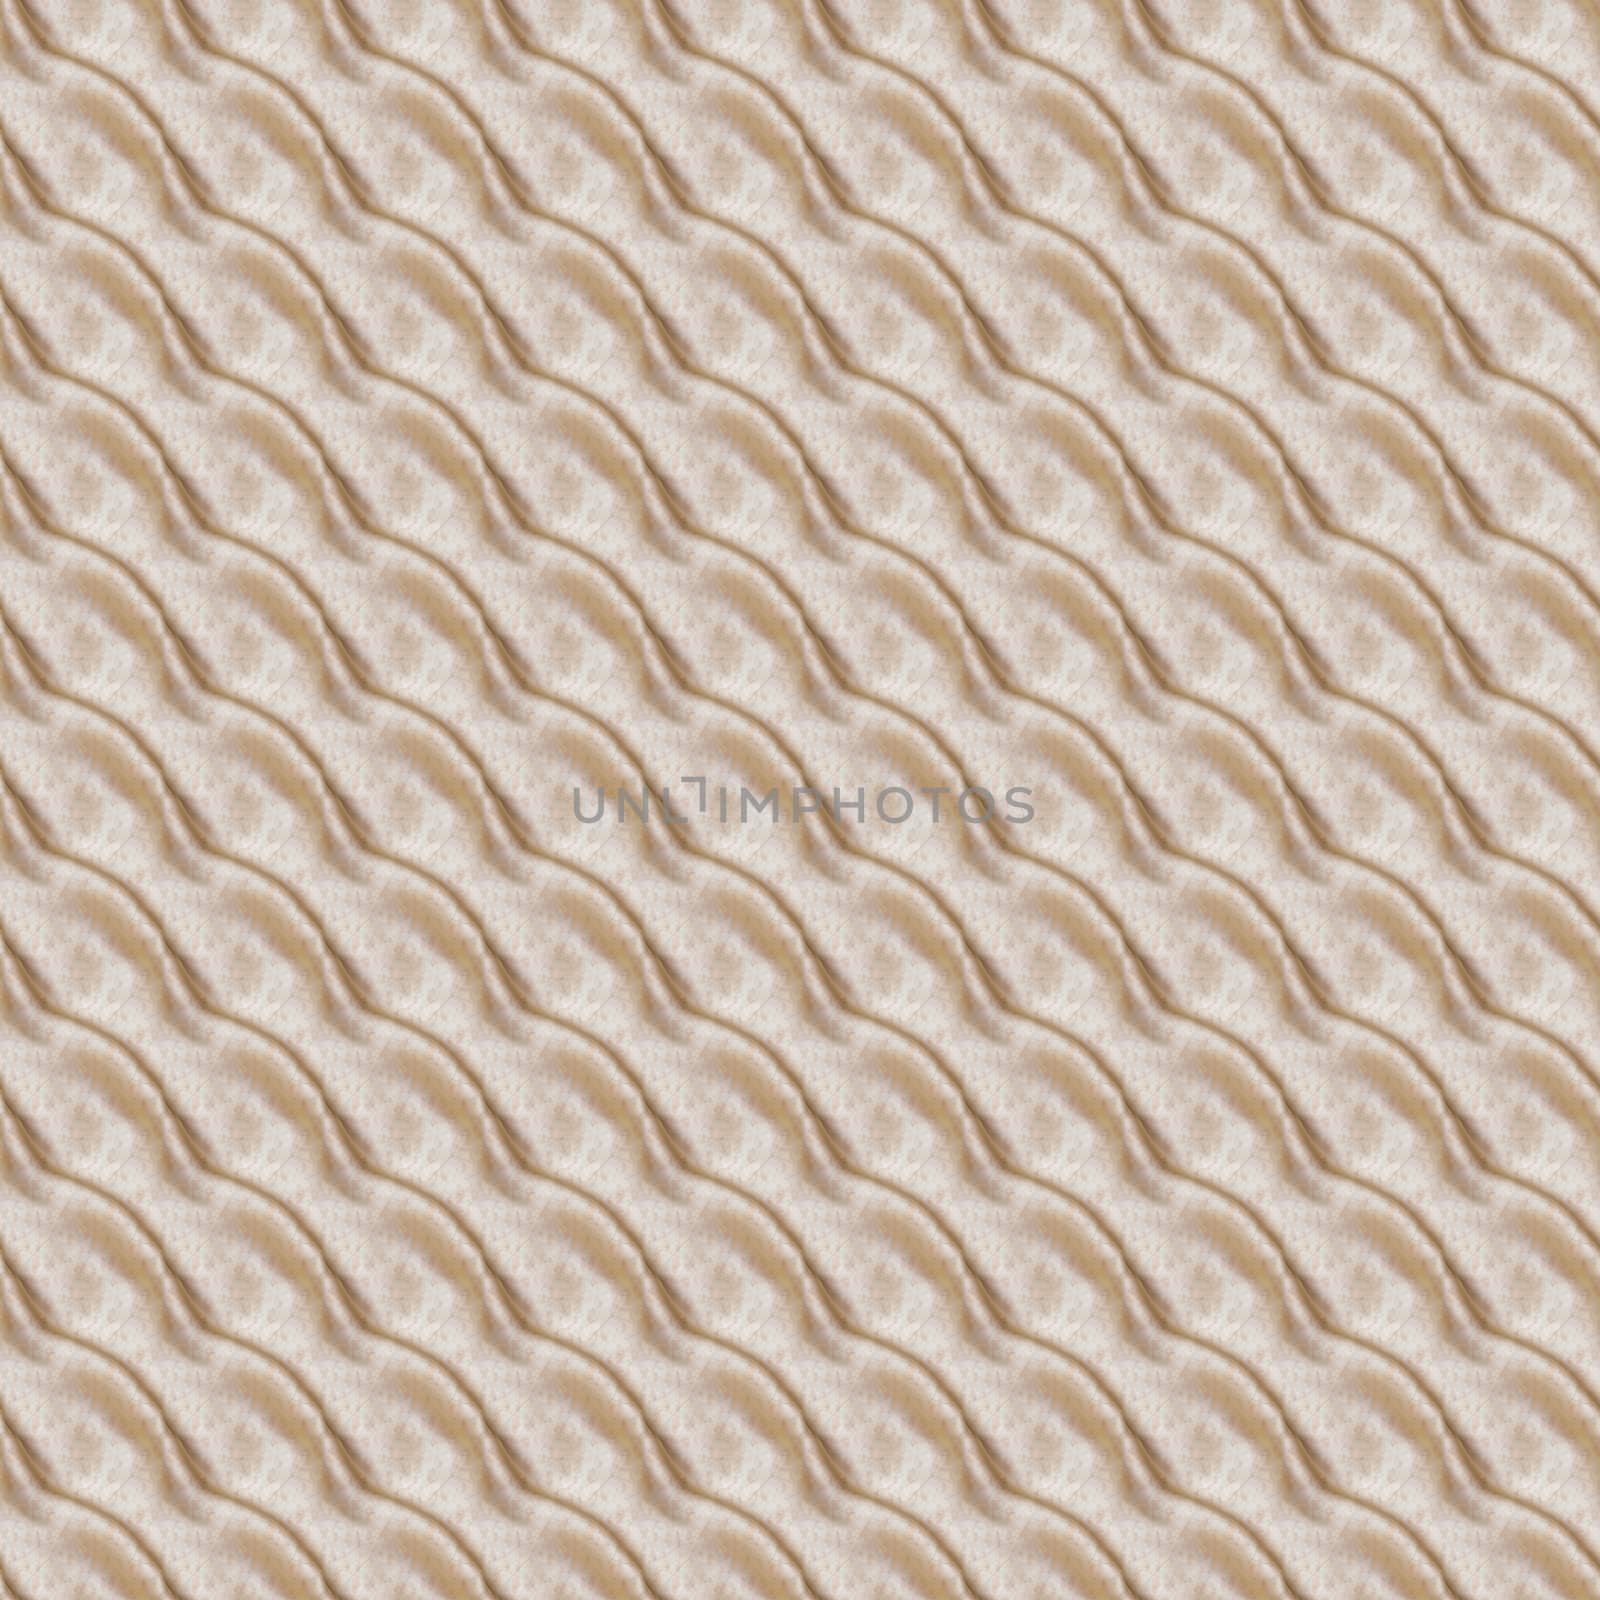 Silky Seamless Pattern - this image can be composed like tiles endlessly without visible lines between parts